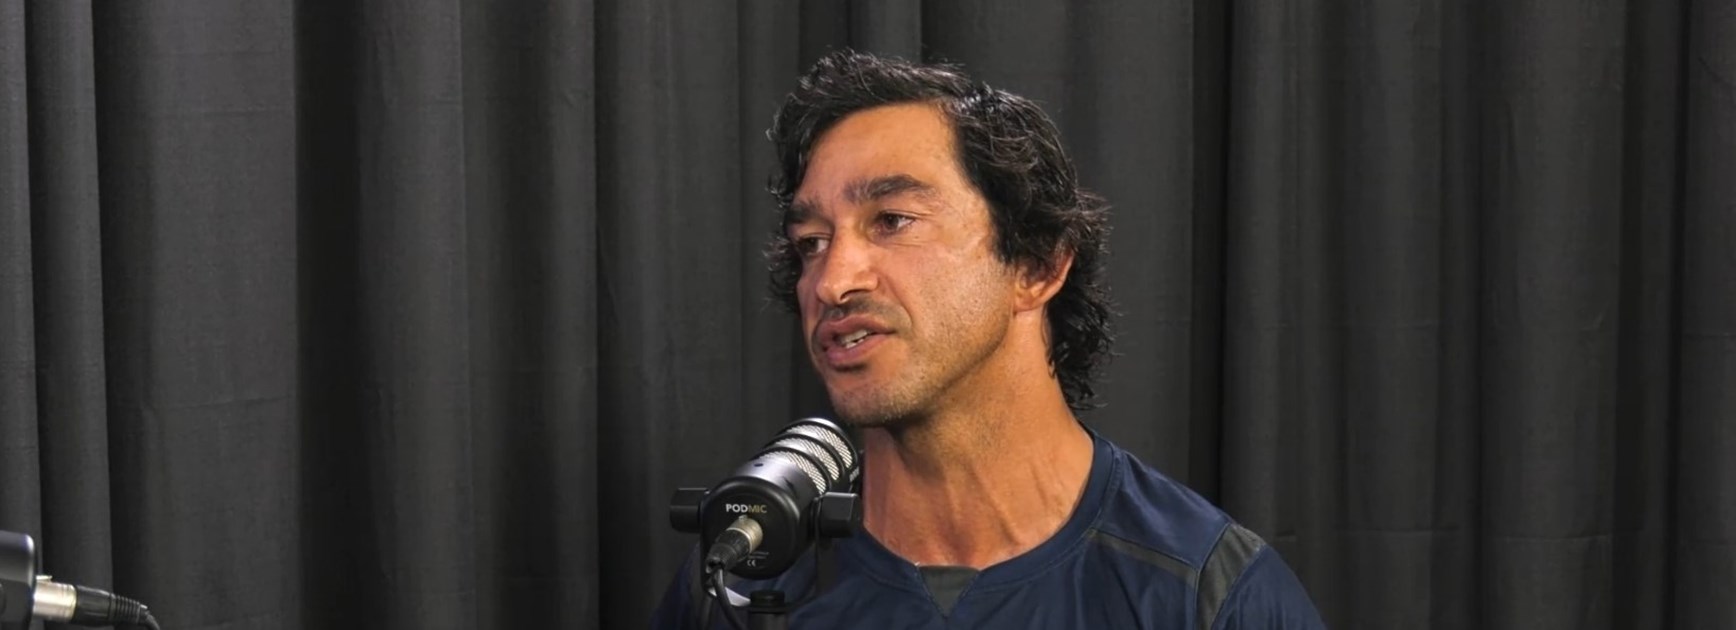 Thurston: That is a decision I wish I could have taken back